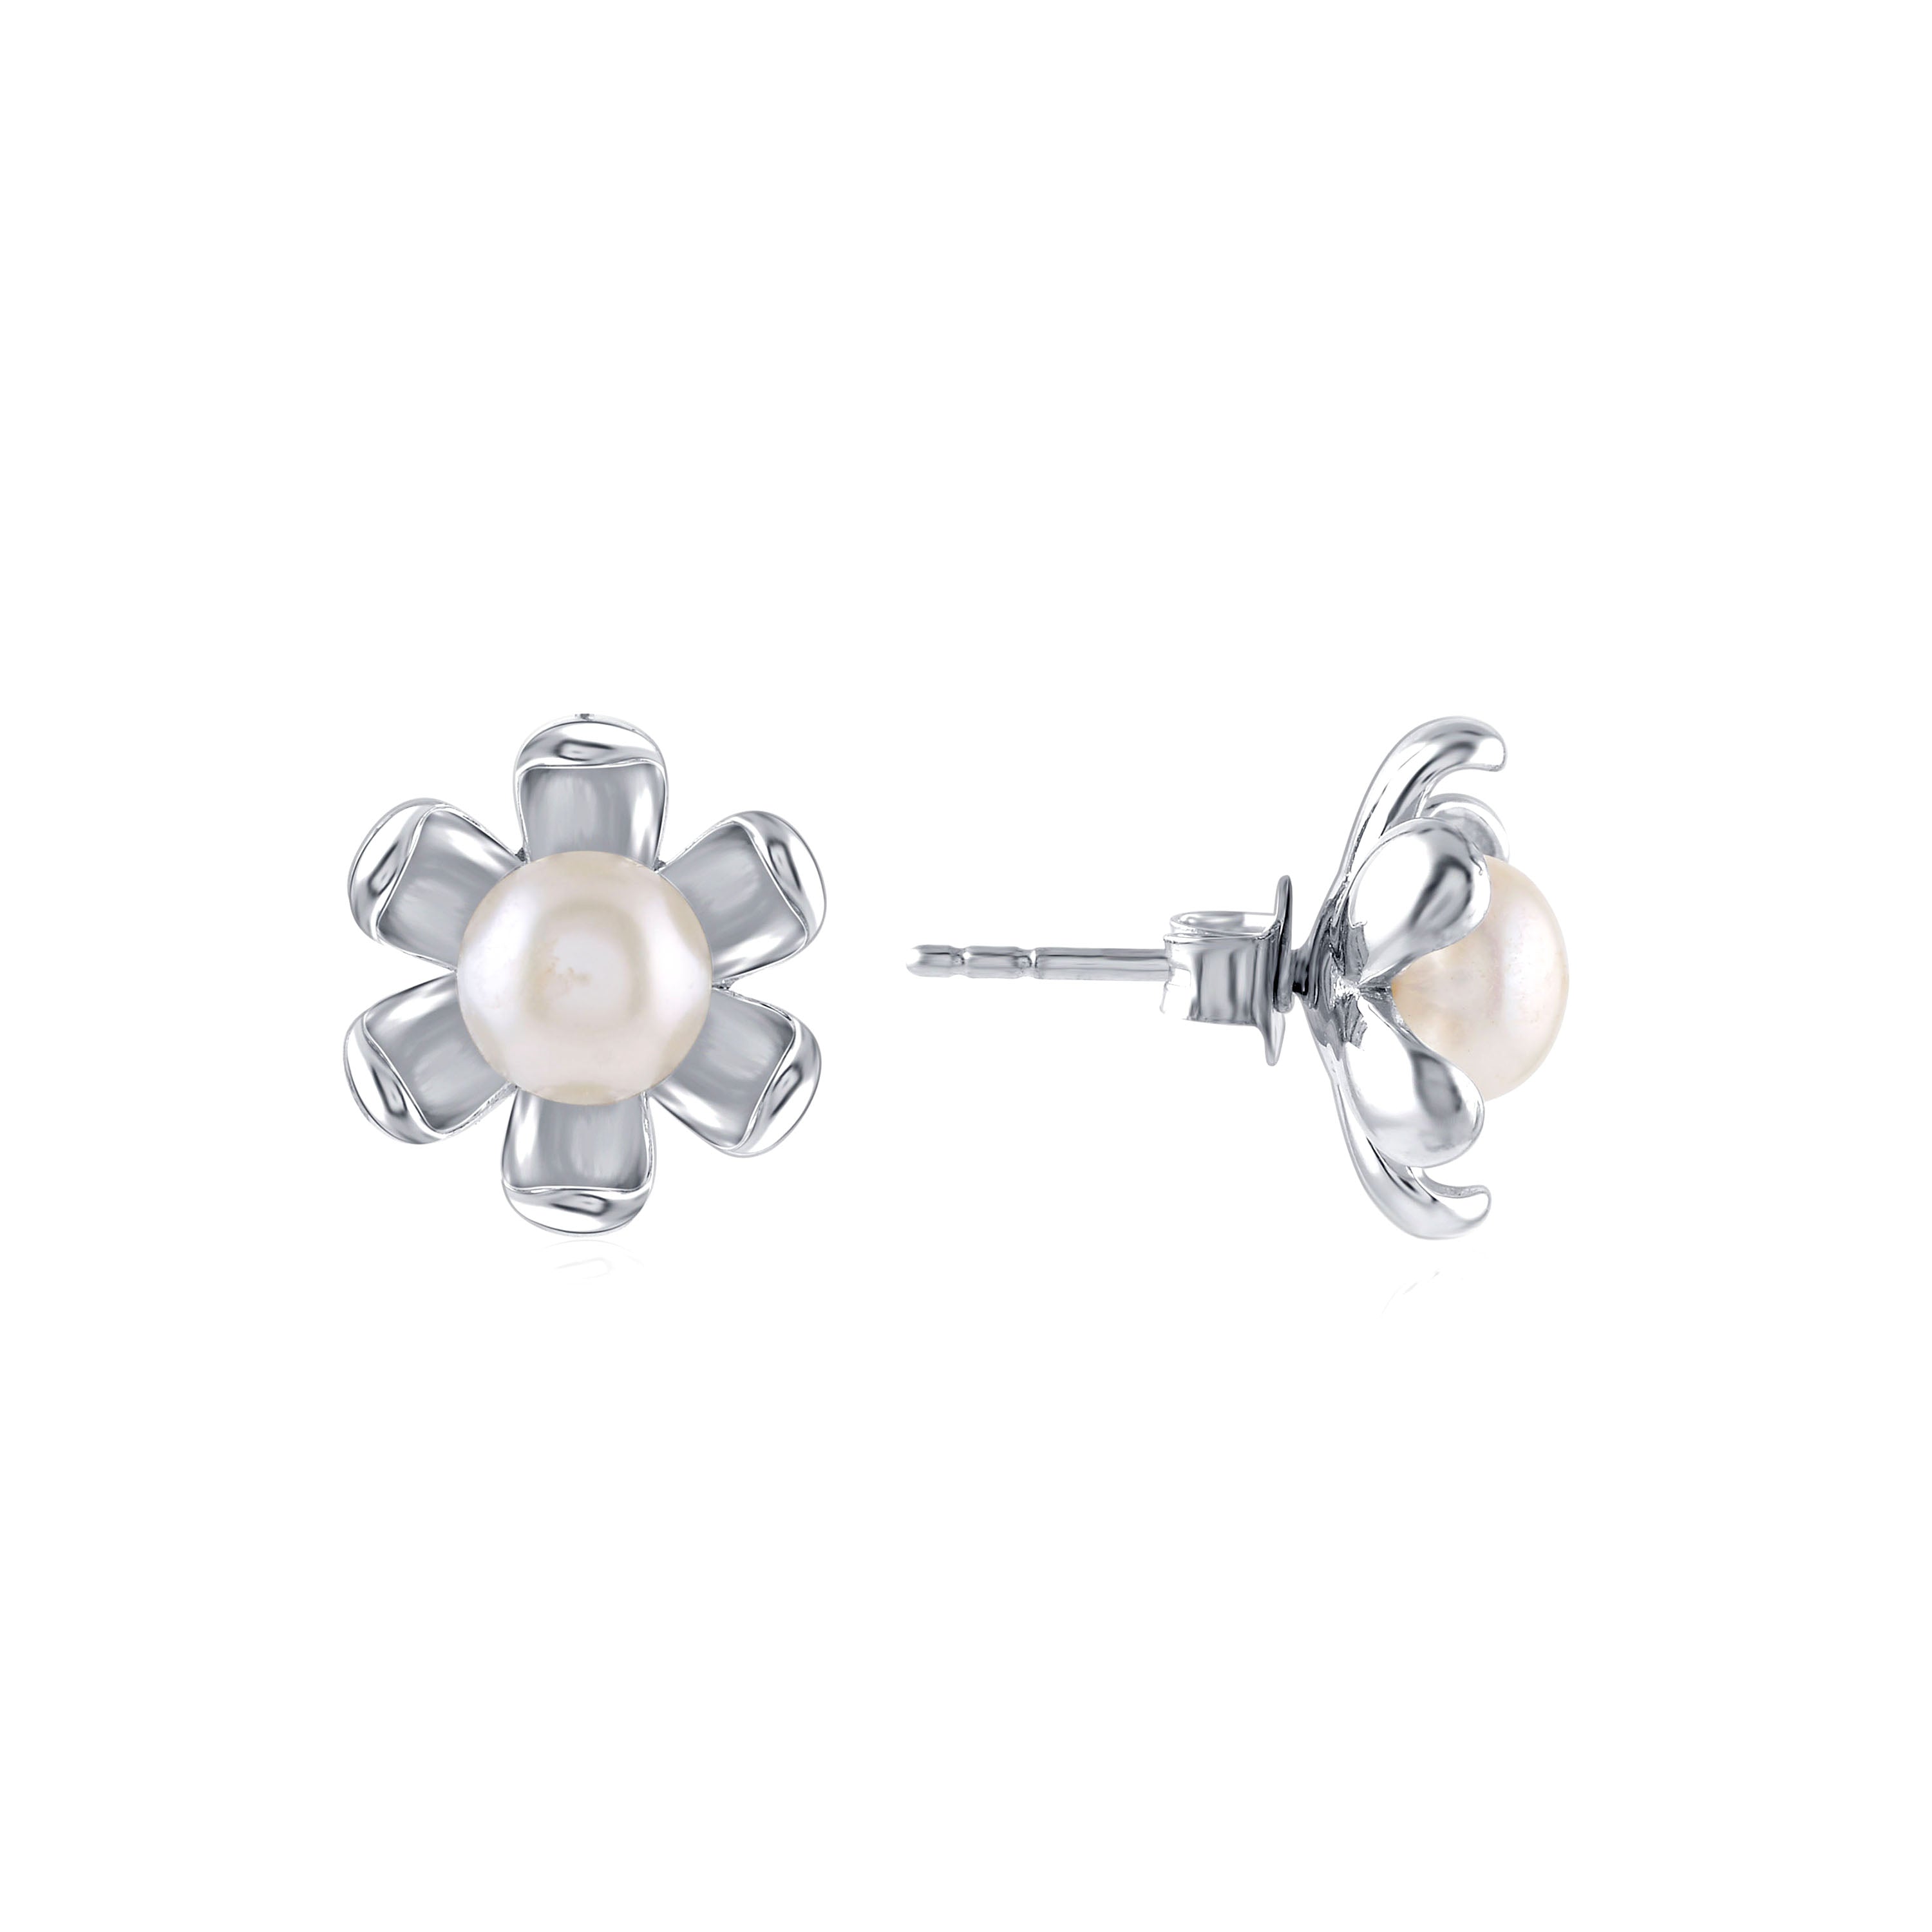 Stunning Silver Floral Pearls Studs Earrings